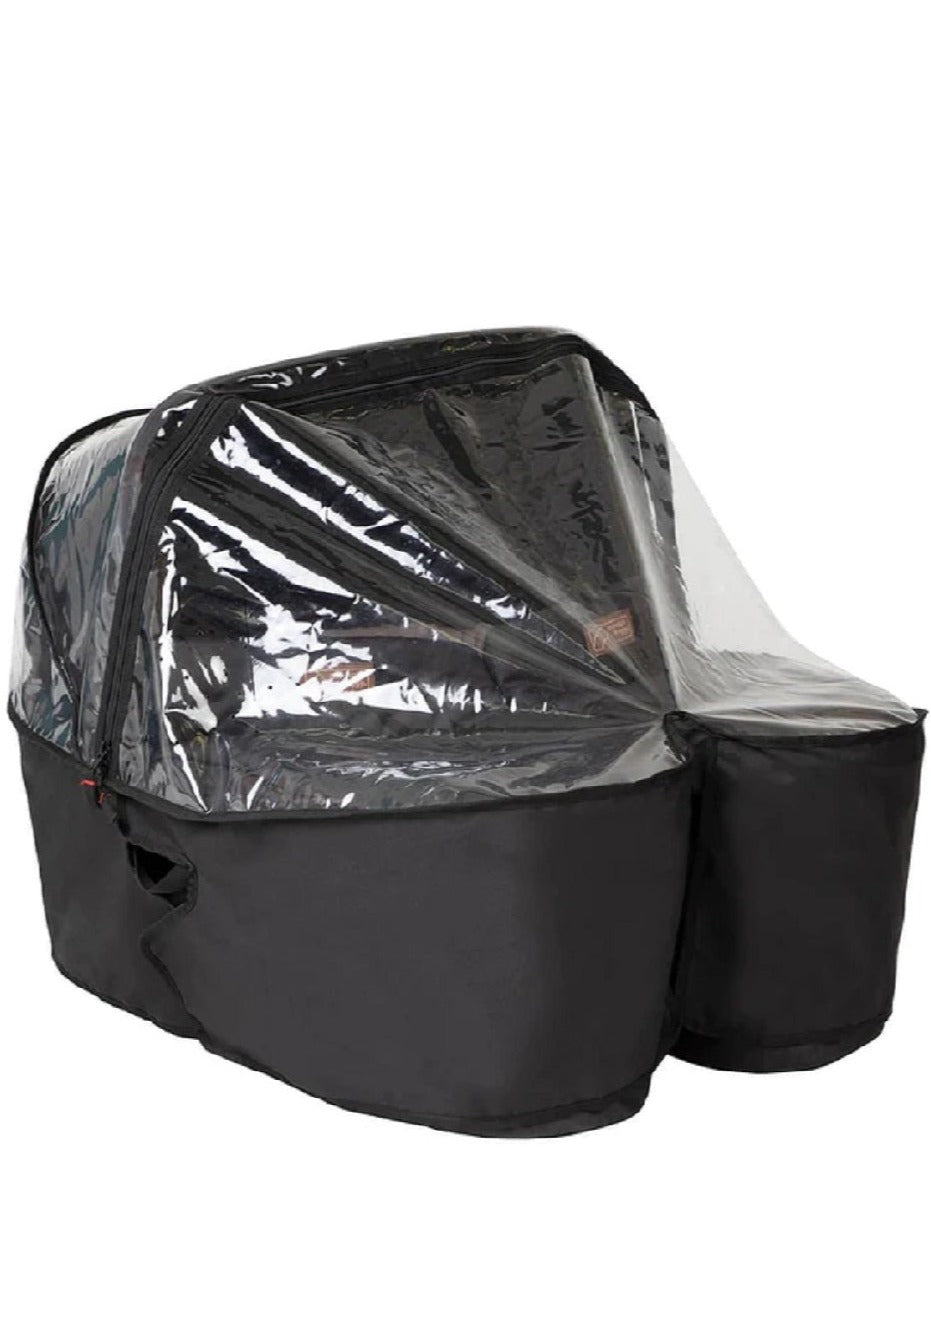 Moutain Buggy Duet Carrycot Plus For Twins